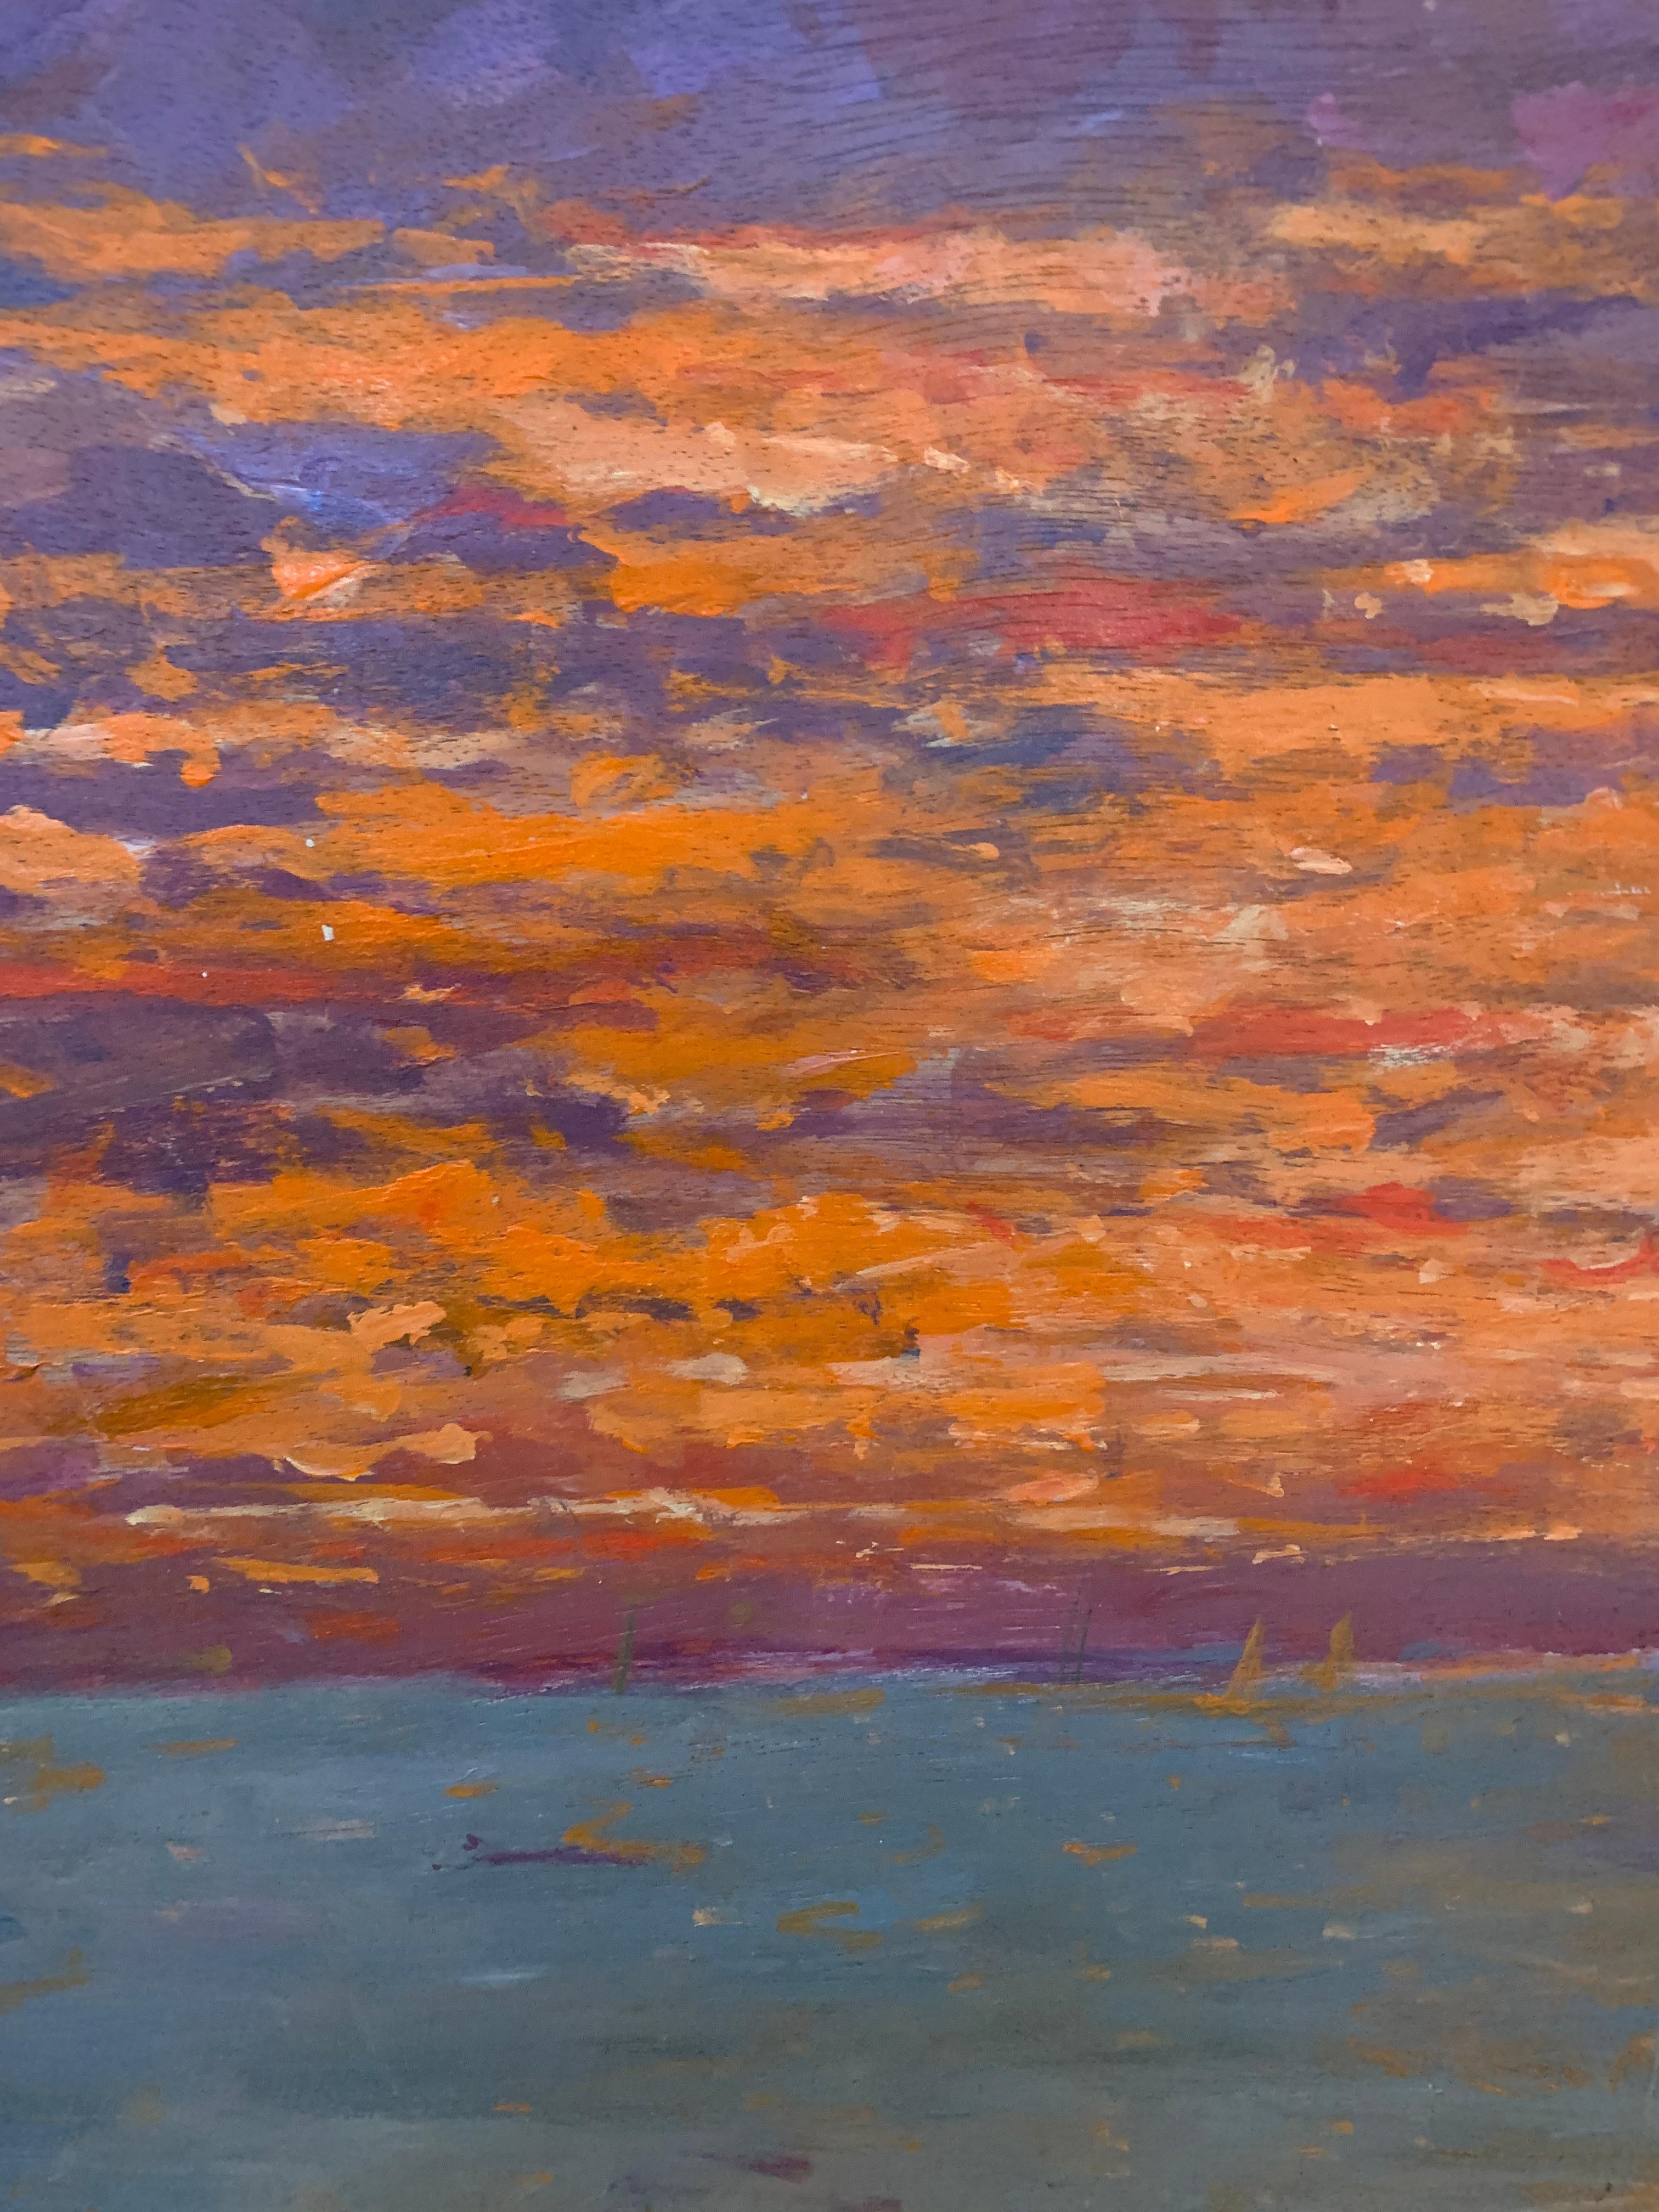 Summer 2019 Sunset in Nantucket with landscape near Madaket - American Impressionist Painting by Charles Bertie Hall